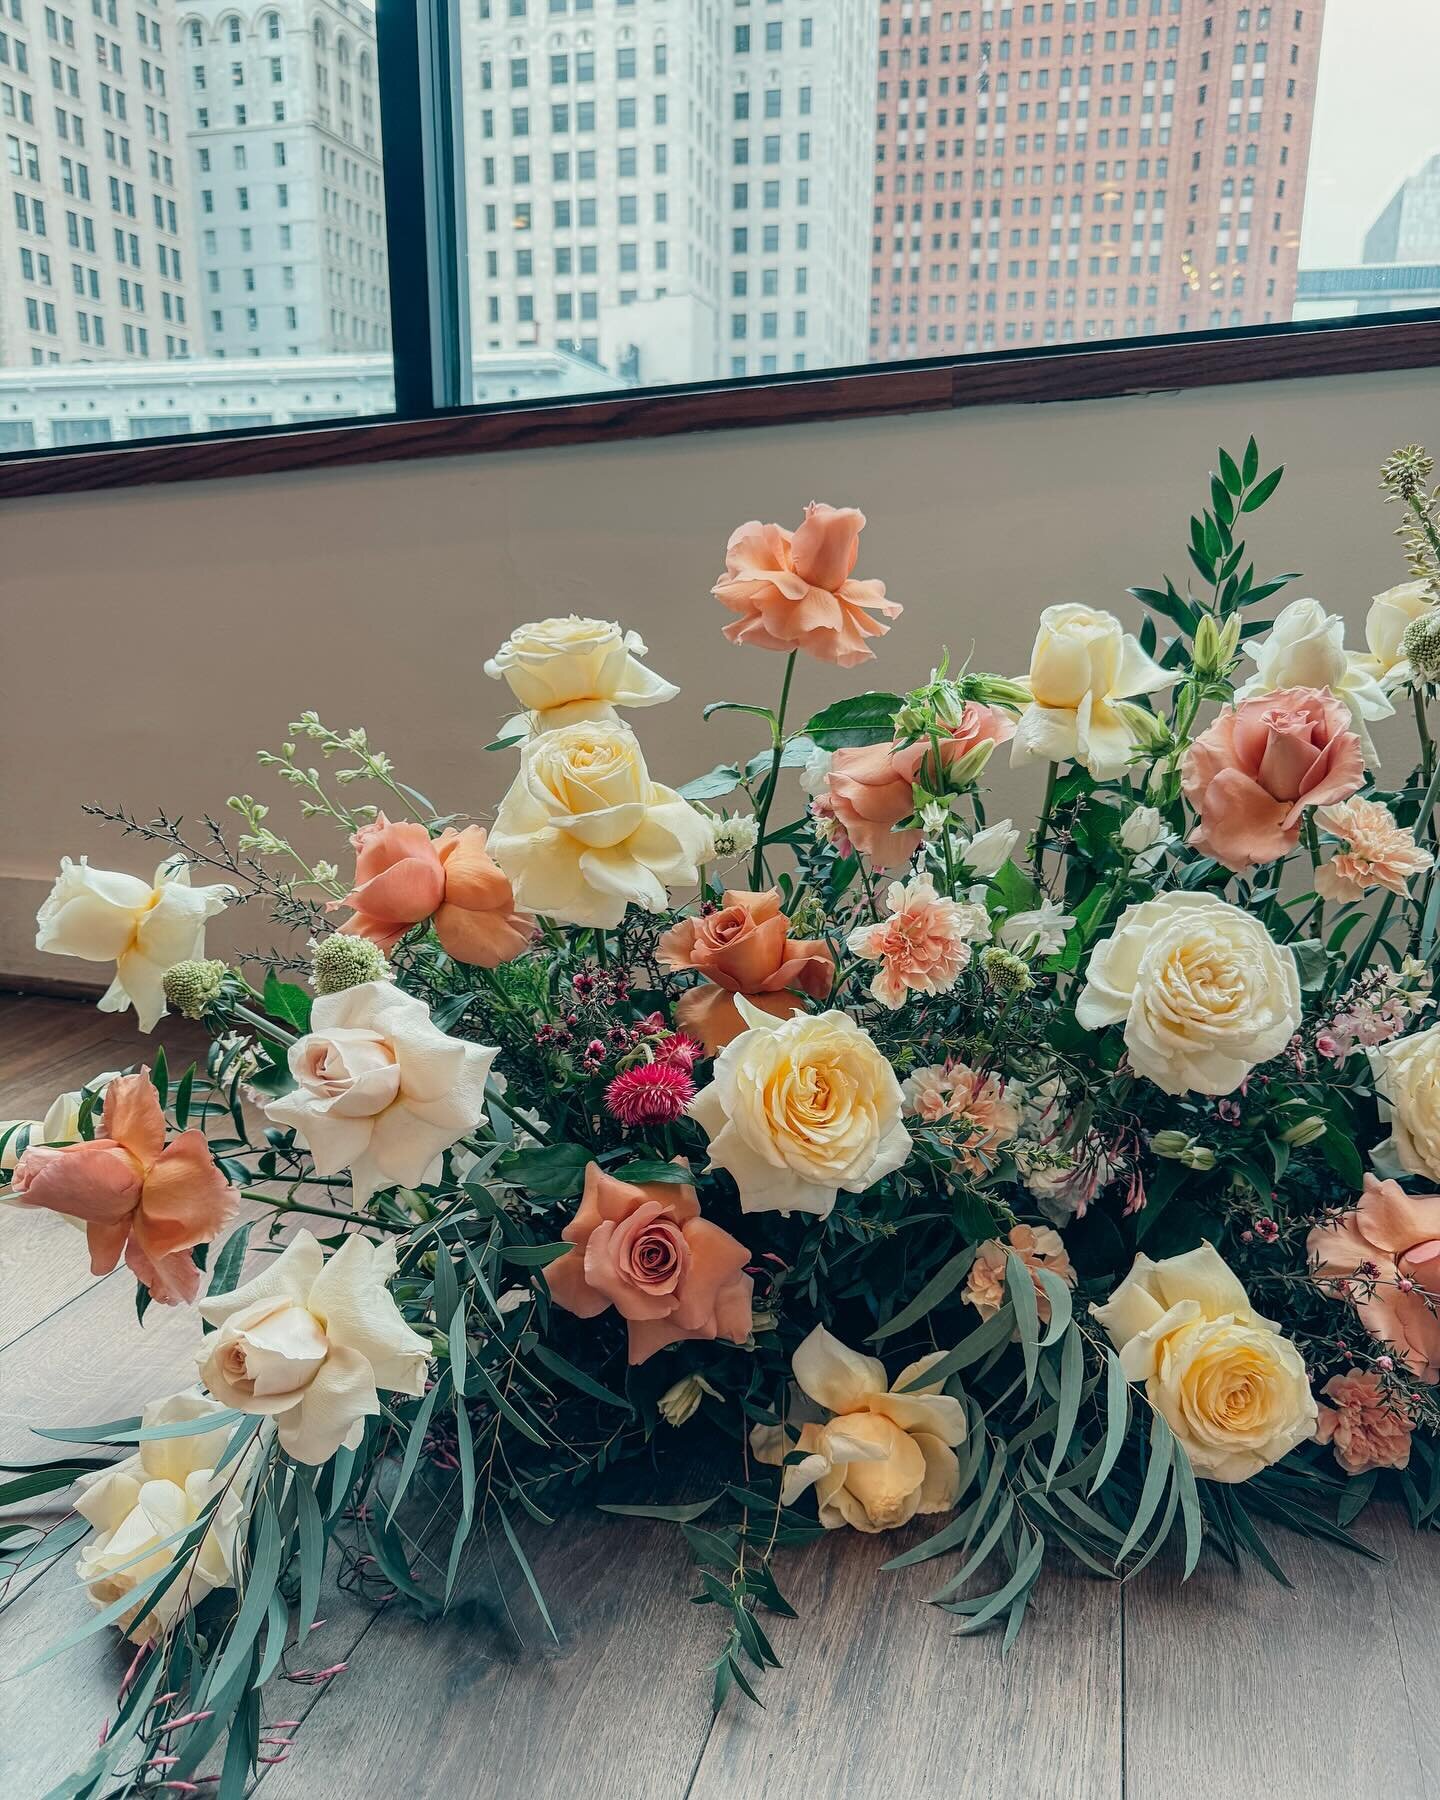 Welcome back, wedding season 🥰✨

Here&rsquo;s to beauty, excellence and tons of fun 🥂

.
.
#weddingflowers #ceremonyflowers #weddingflorist #detroitwedding #detroitweddingflorist #eventdesign #weddingplanning